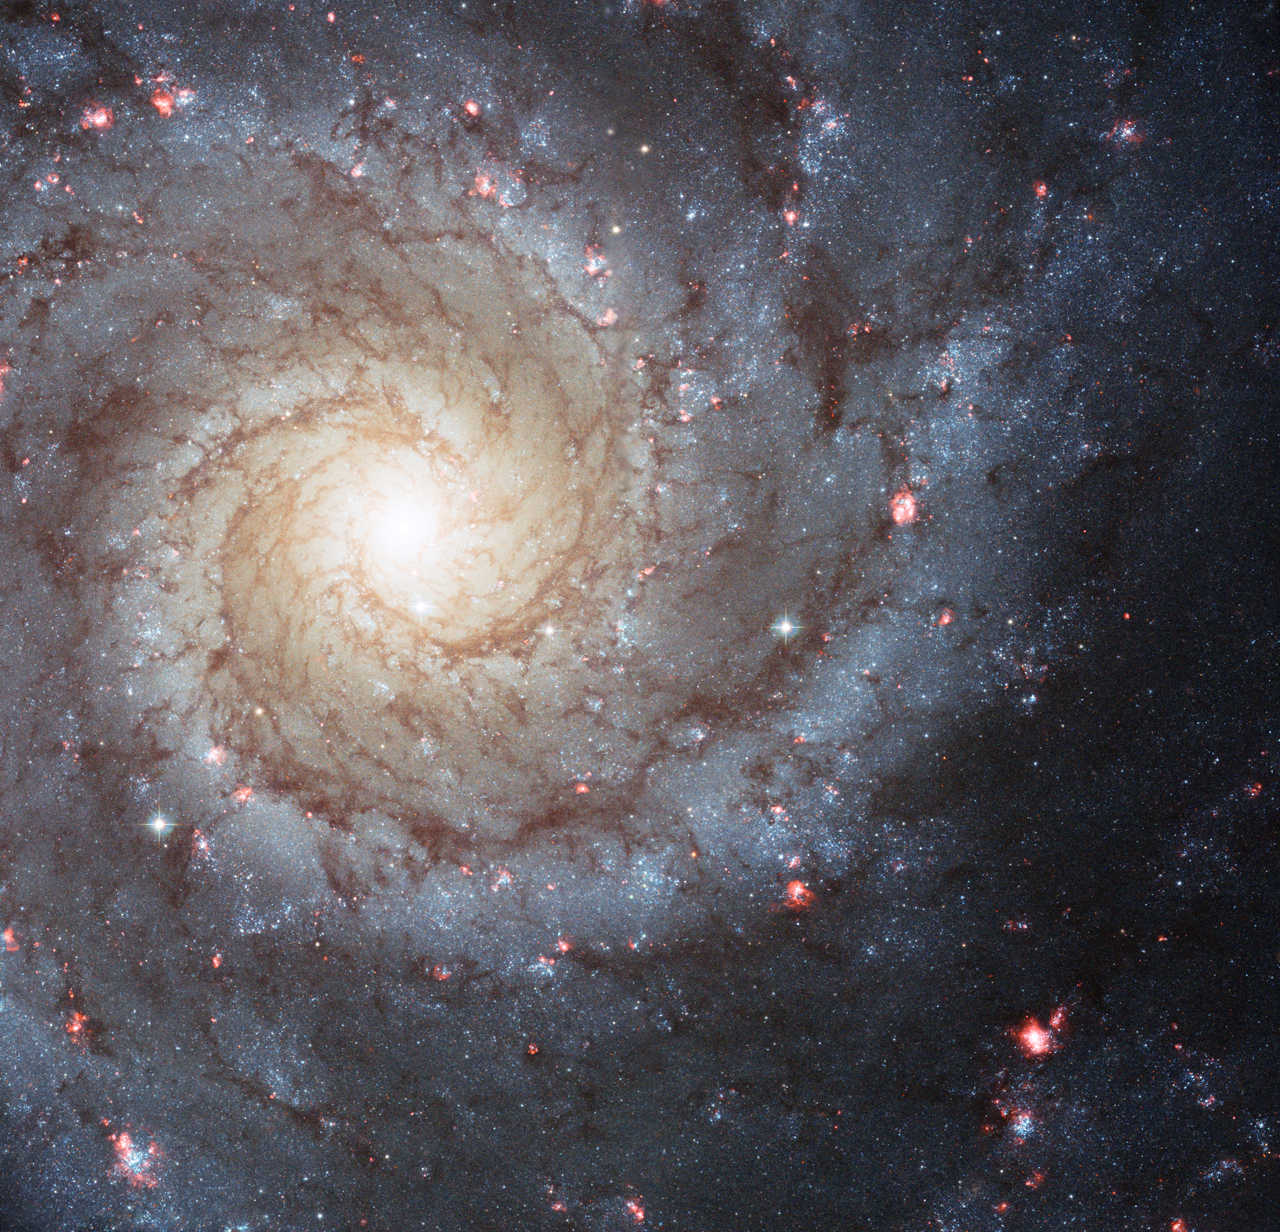 Hubble images of spiral galaxy M74